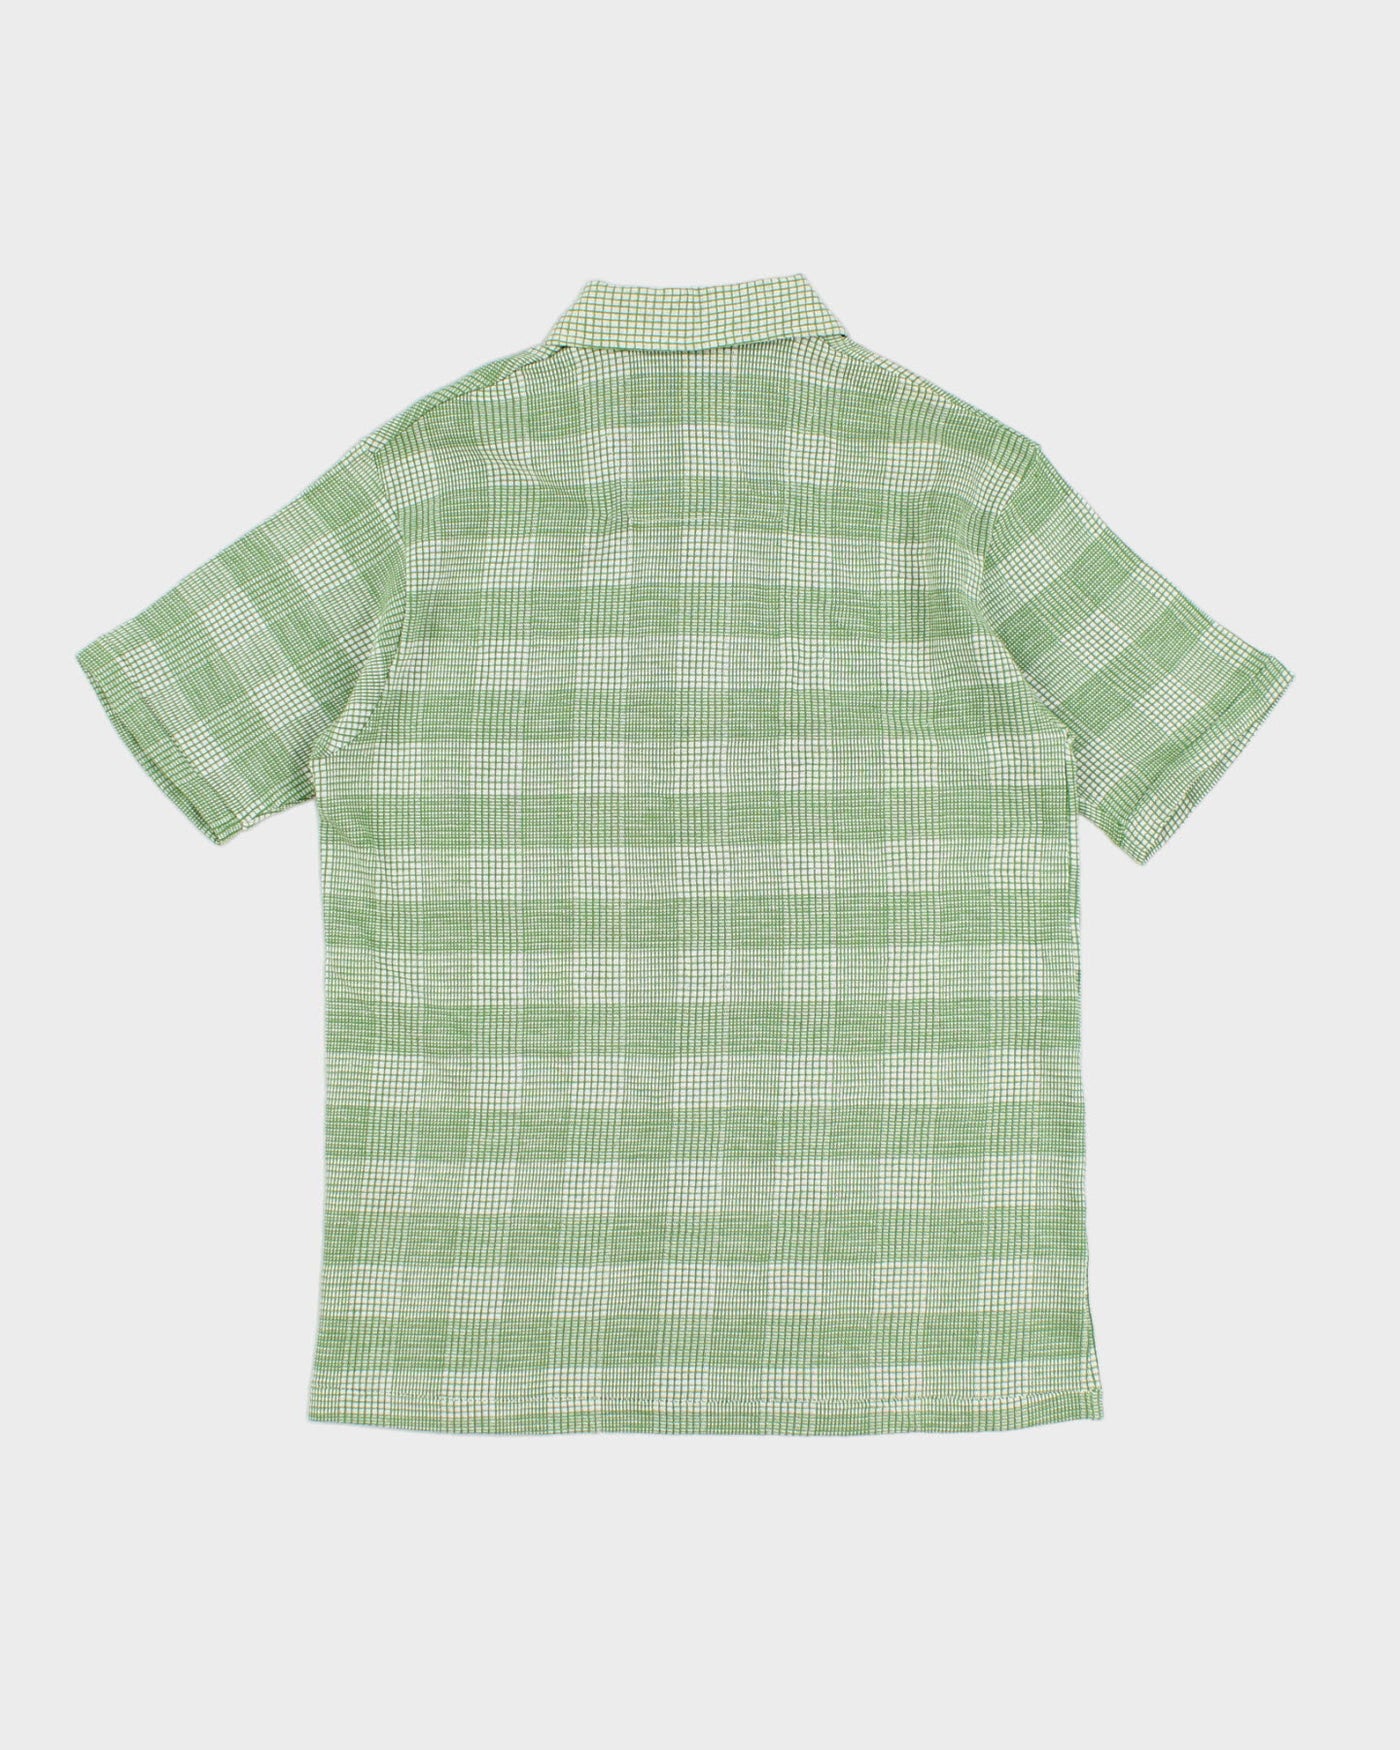 Vintage 50s Green Check Short Sleeved Polo - M